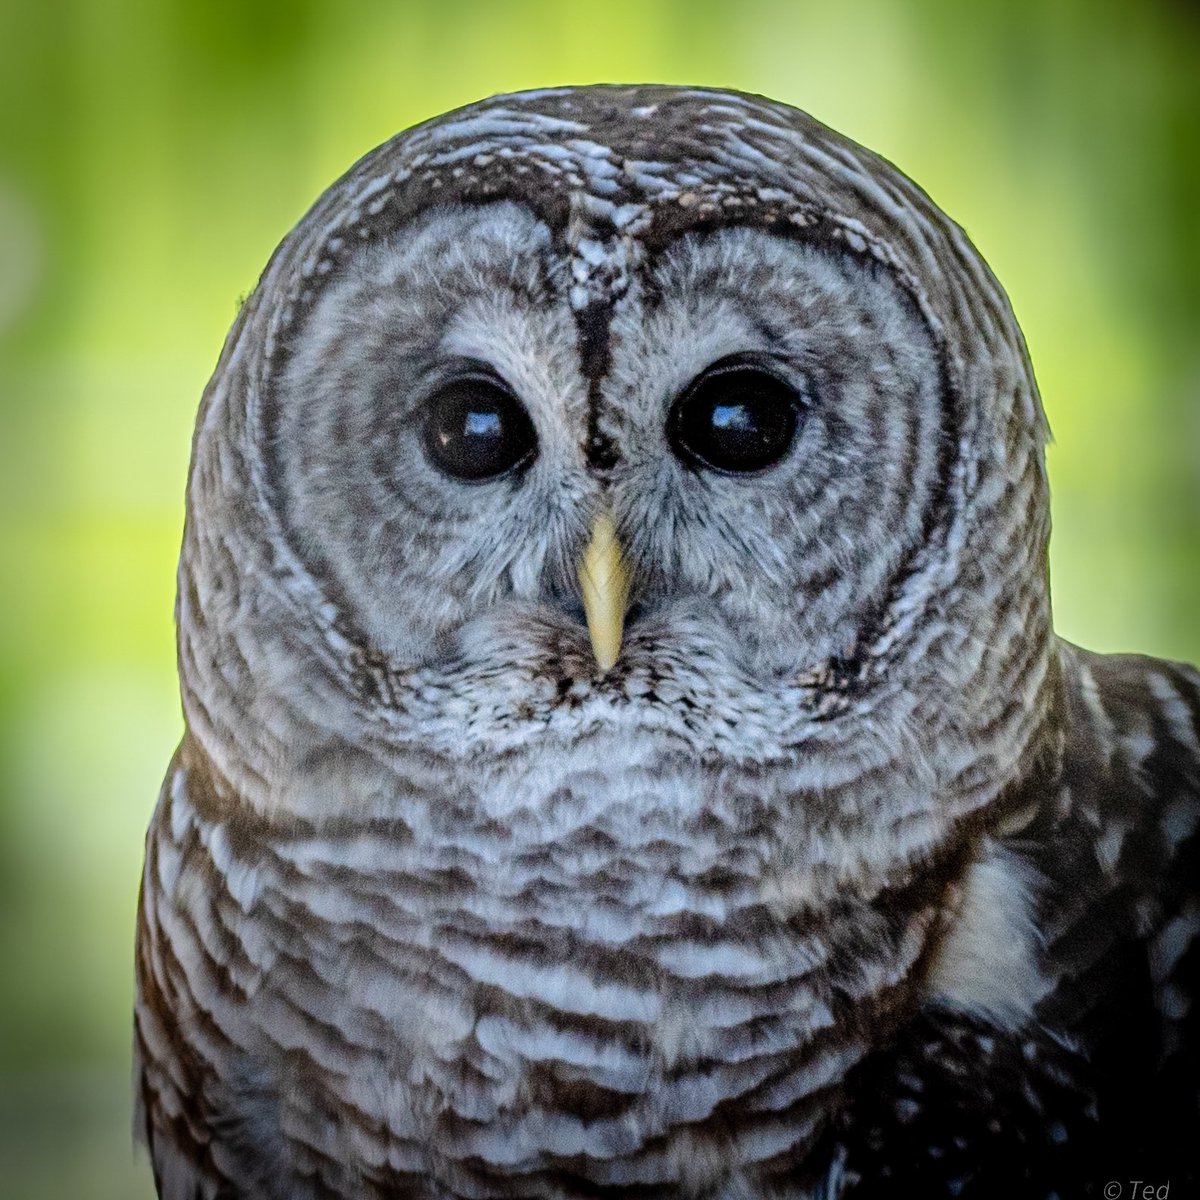 A Barred owl stare down. Have an excellent weekend ahead everyone.✌️🦉 #Nature #Photography #PhotographyOnX #BirdPhotography #IllinoisWetlands